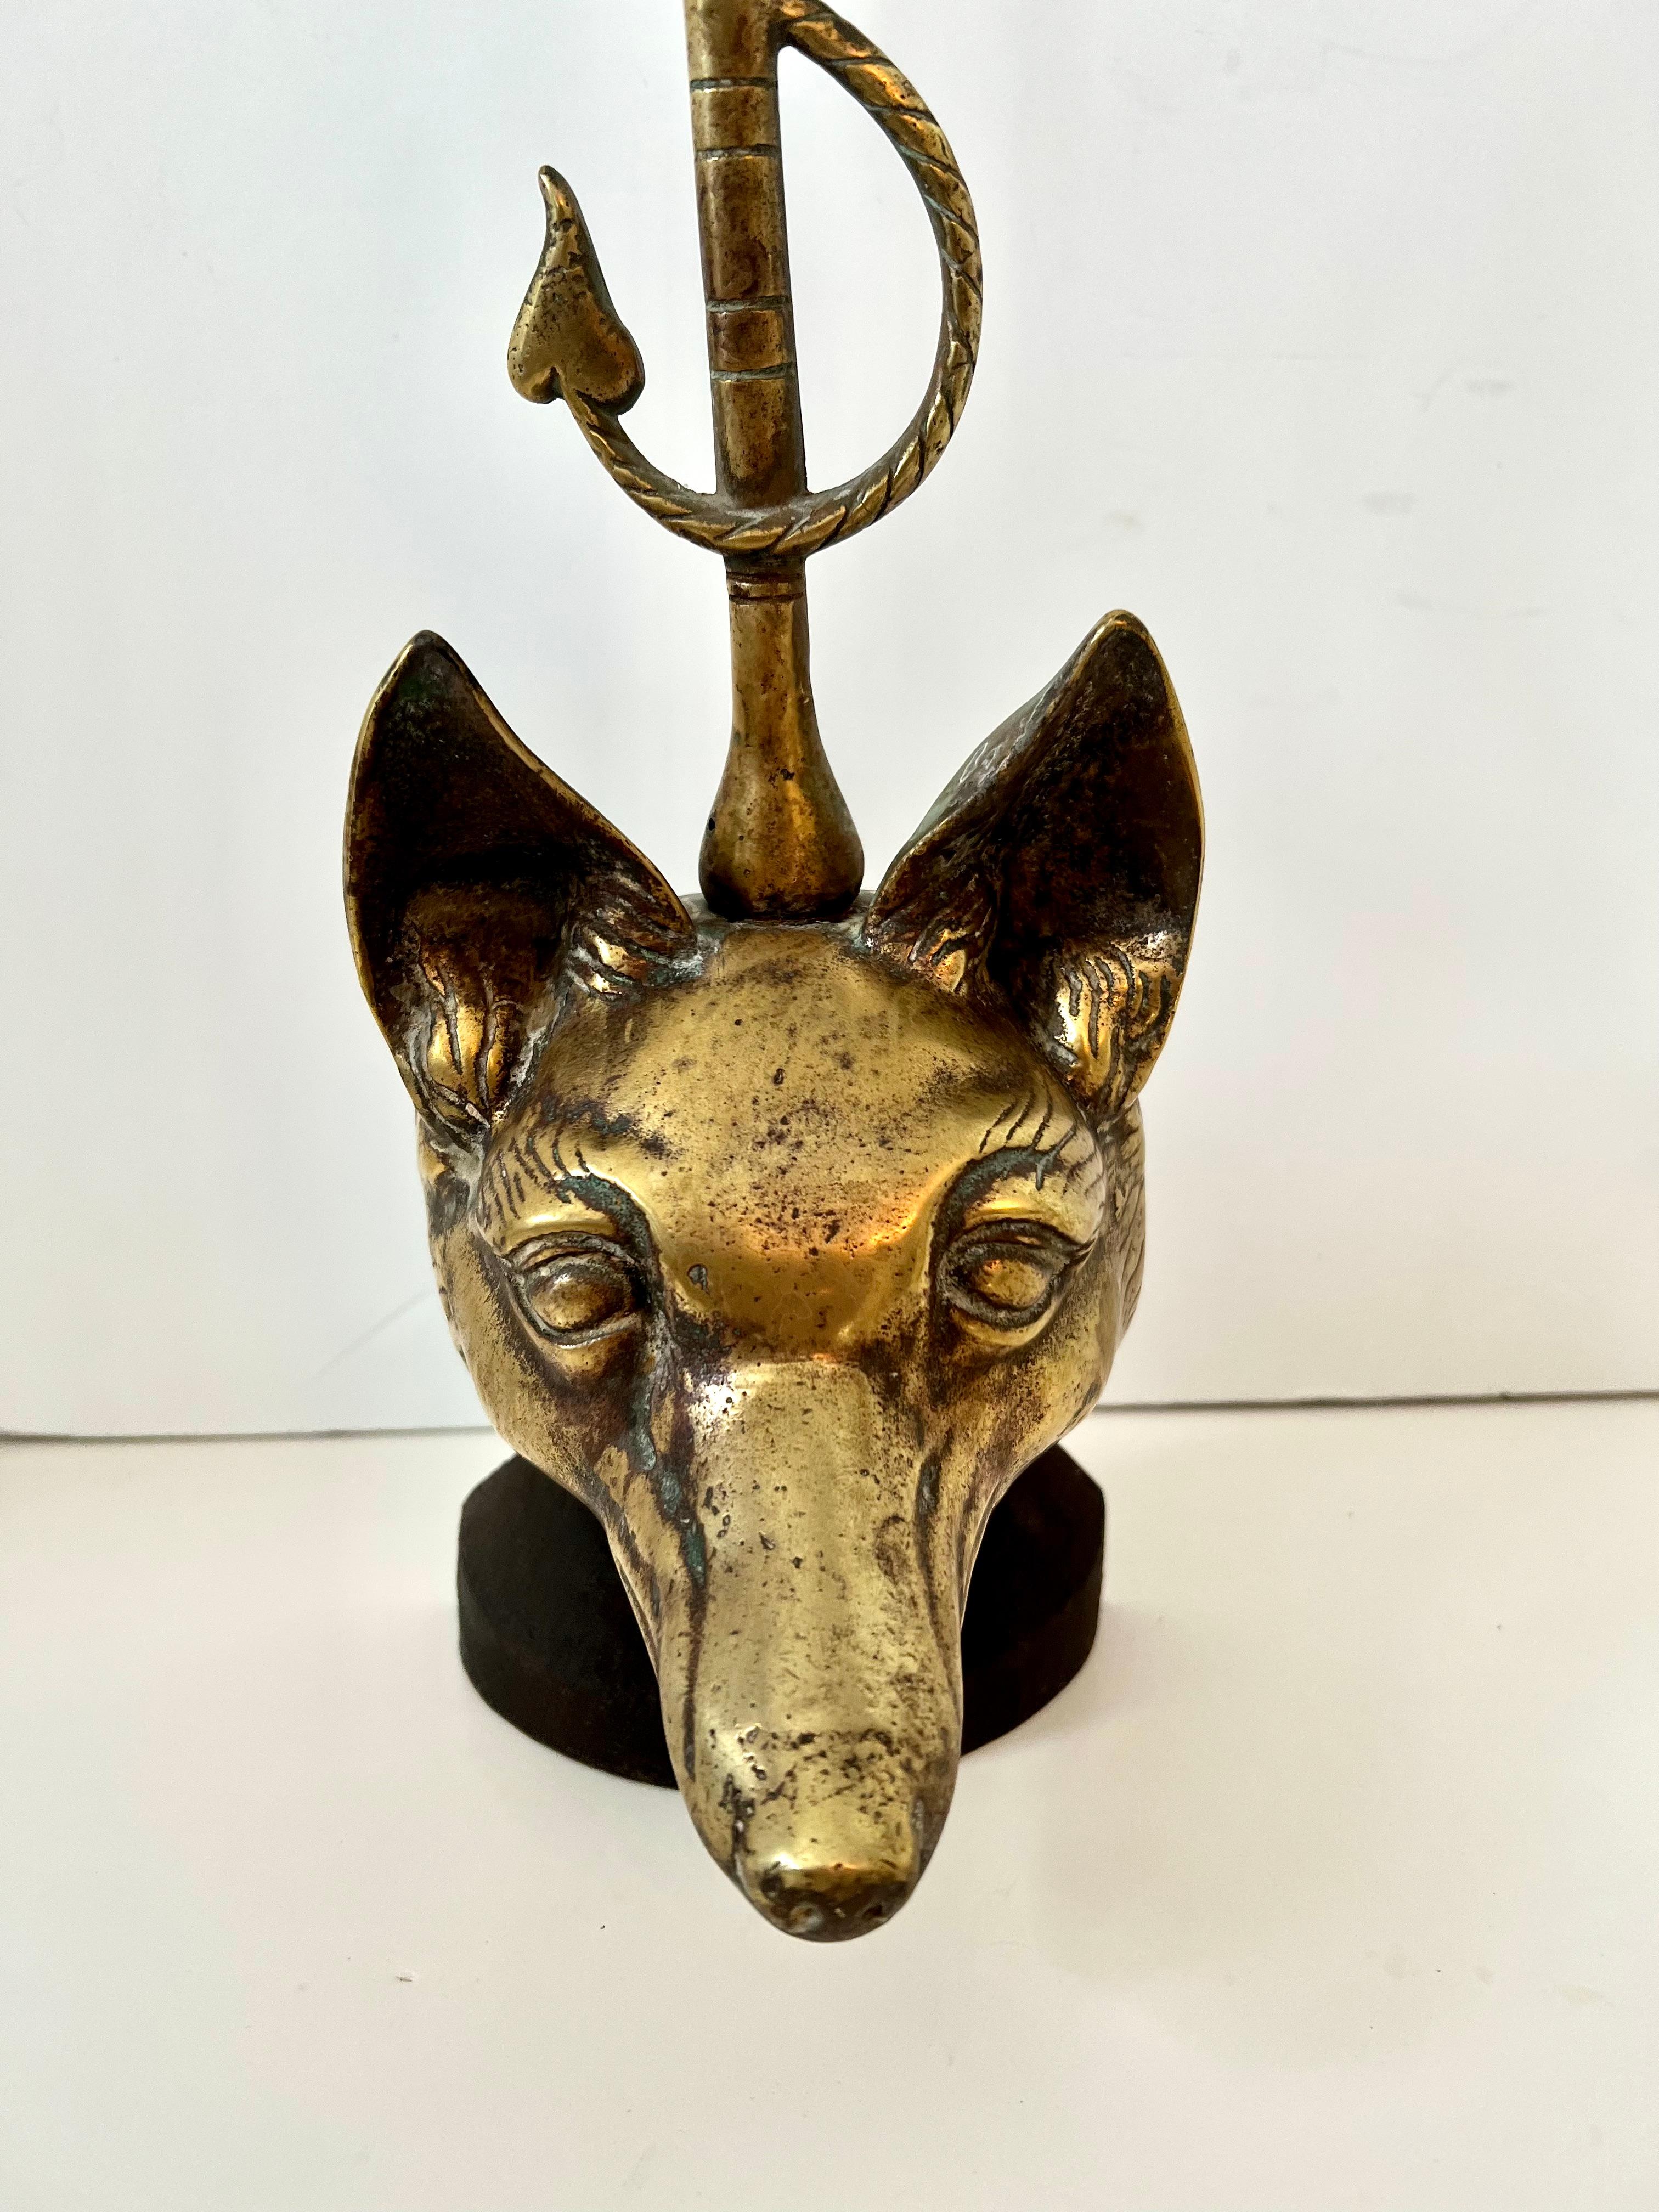 Hand-Crafted English Art Deco Brass Fox Door Stop With Riding Crop For Sale